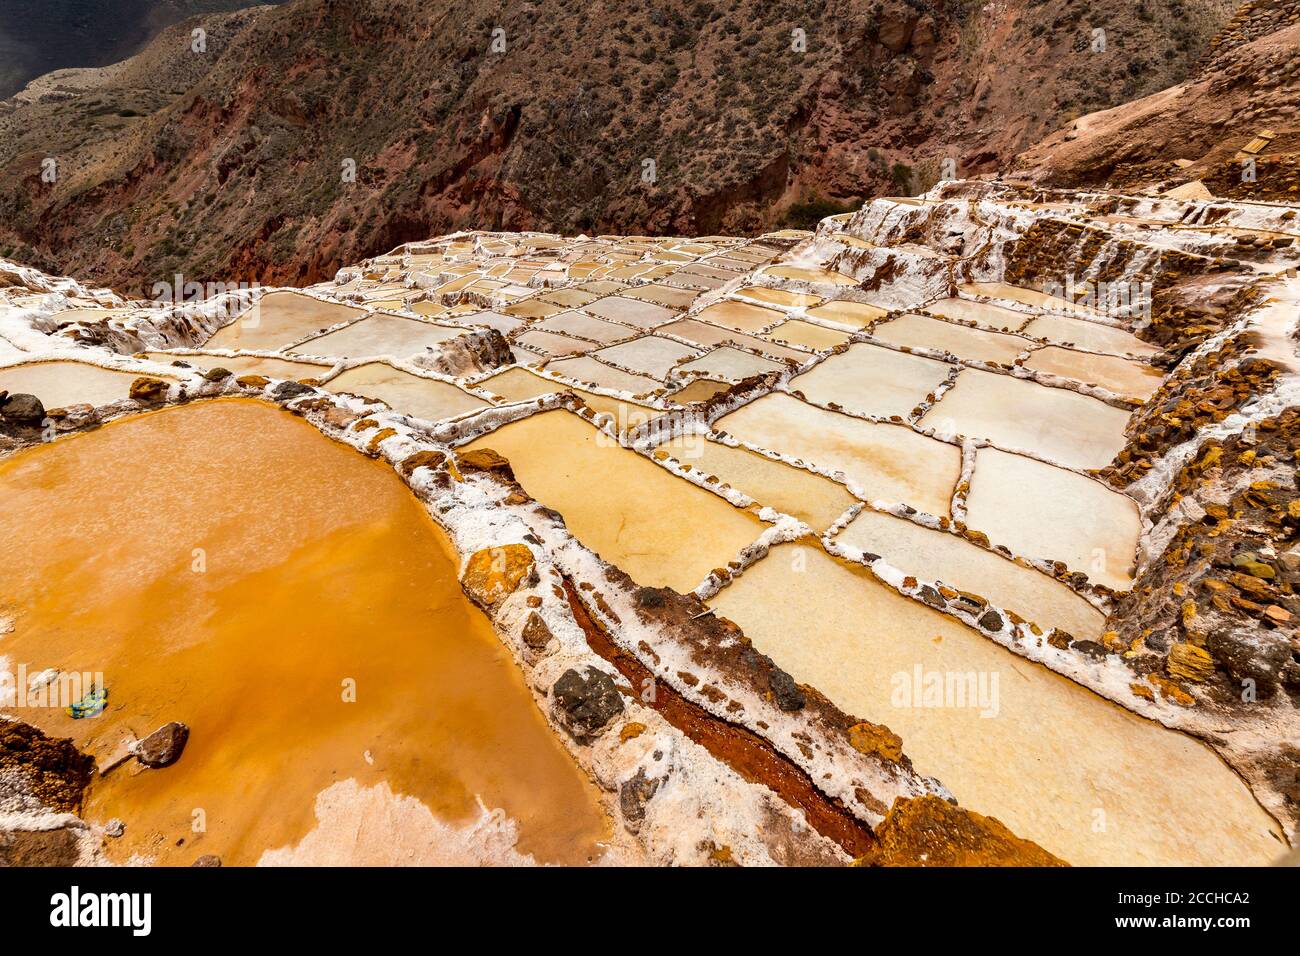 Salt ponds in Maras, Peru. Since pre-Inca times, salt has been obtained in Maras by evaporating salty water from a local subterranean stream. Stock Photo